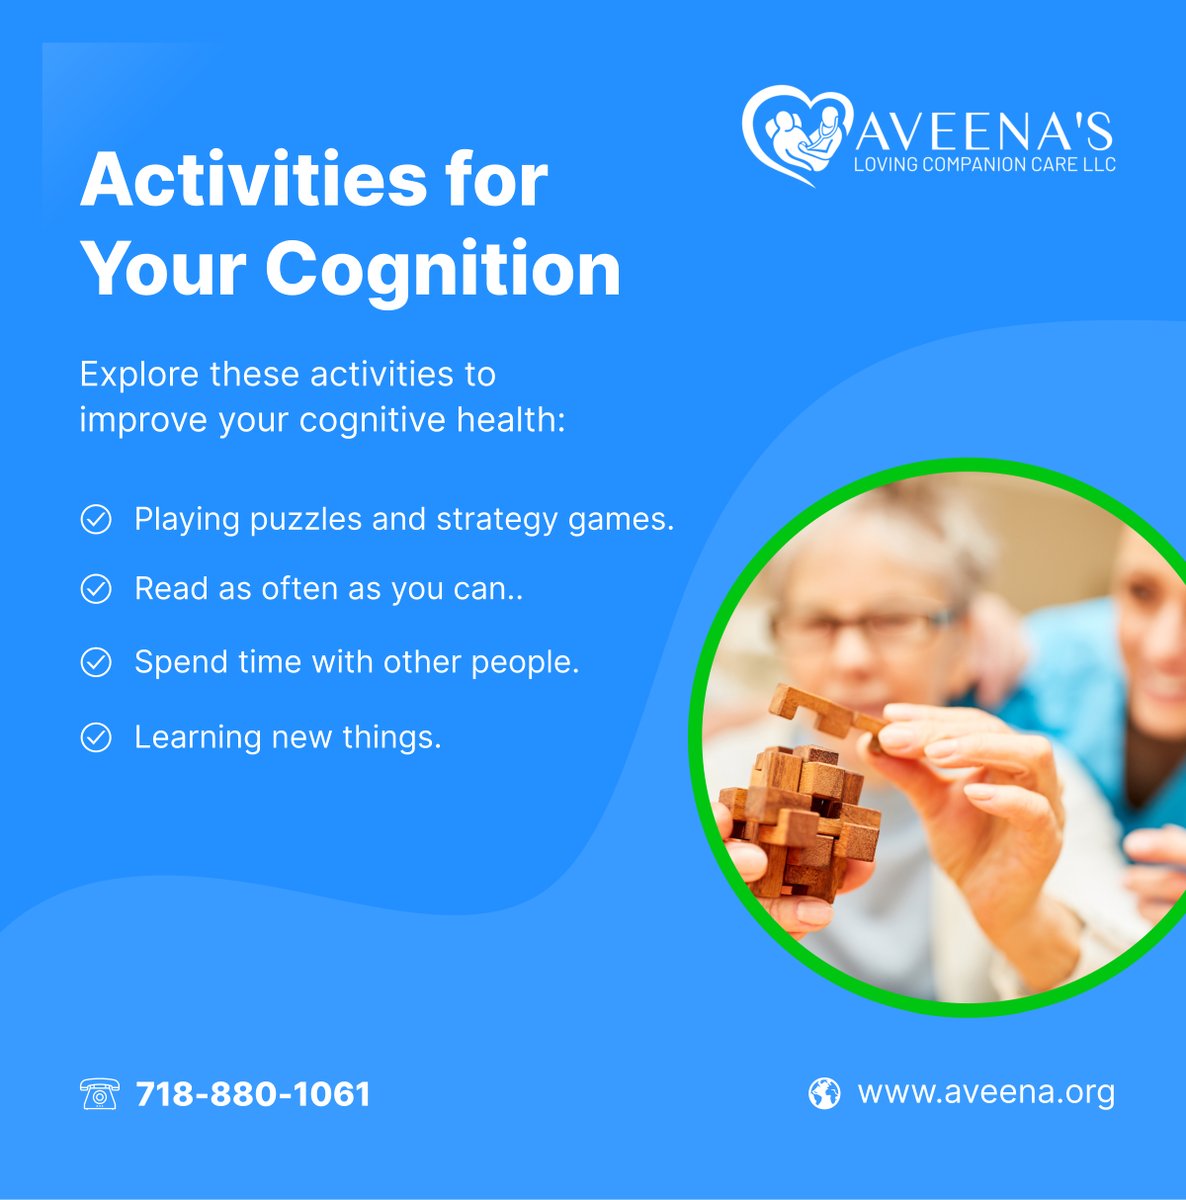 Your cognitive abilities play an important role when crafting a happy and productive life. You can explore a range of simple activities to preserve your cognitive abilities.

#CognitiveAbilities #QueensVillageNY #HomeCare #SimpleActivities